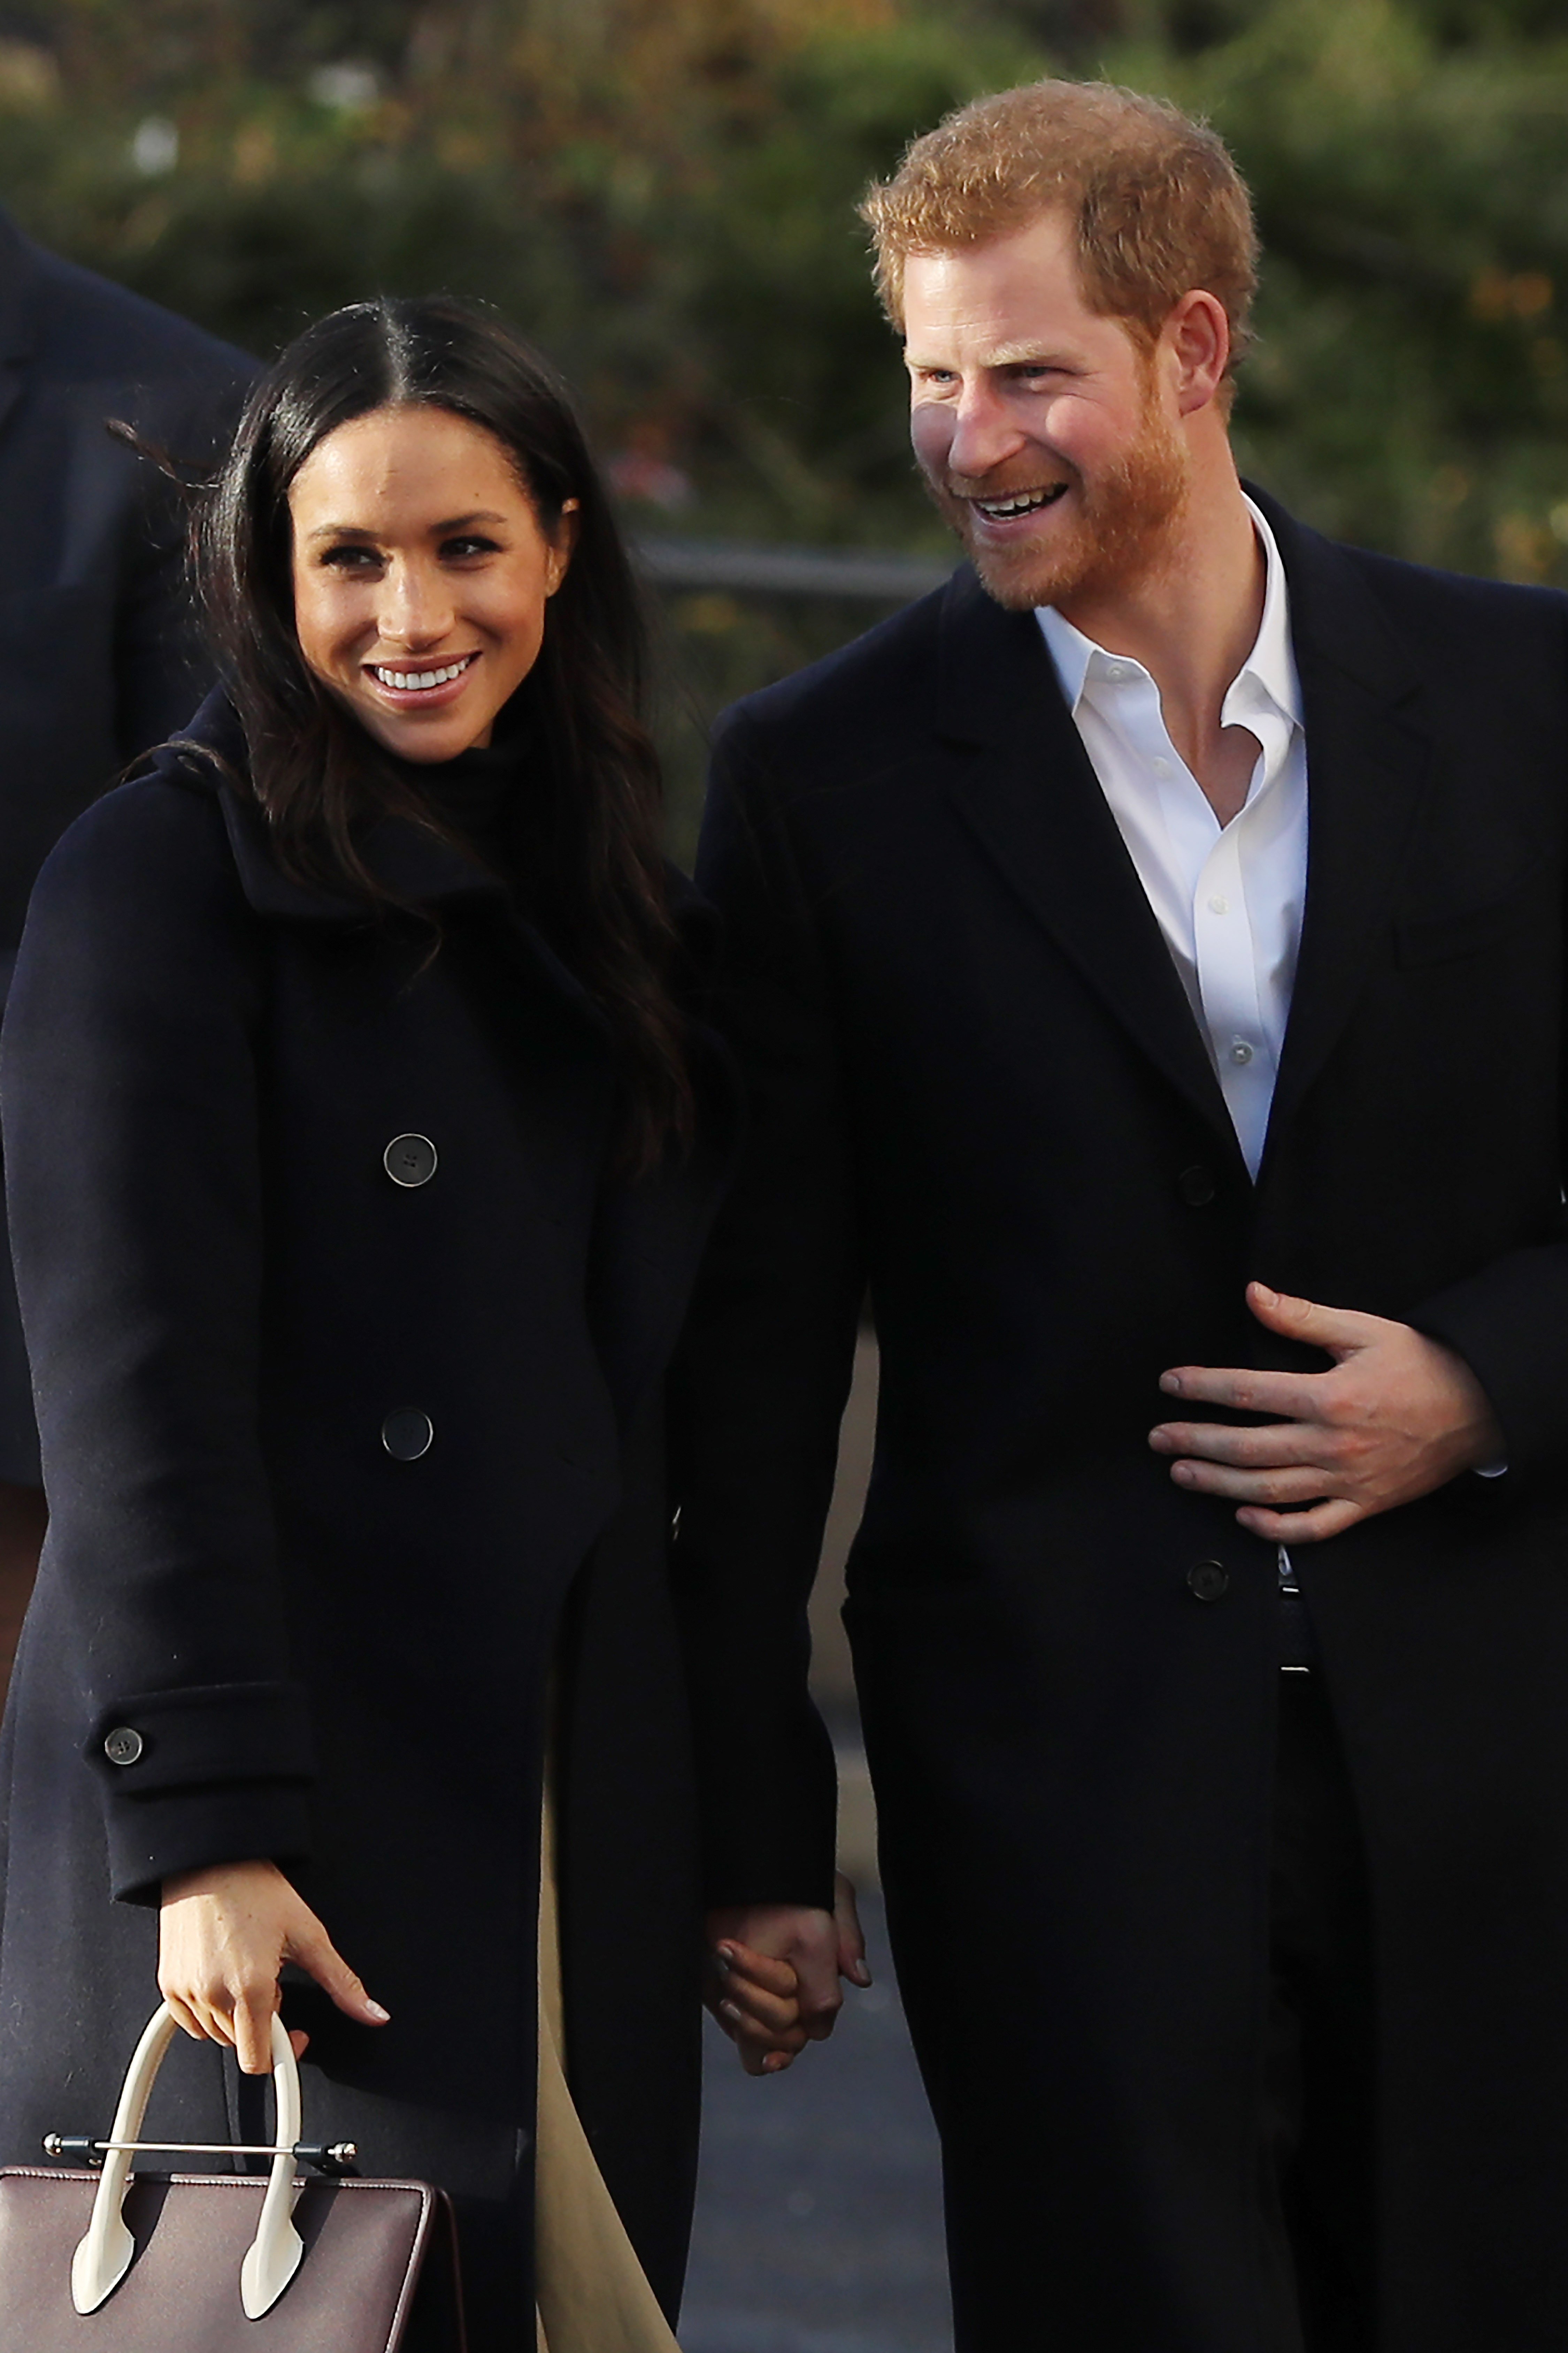 Prince Harry and Meghan Markle, visit the Nottingham Academy as part of their first official public engagements together on December 1, 2017 in Nottingham, England | Photo: Getty Images